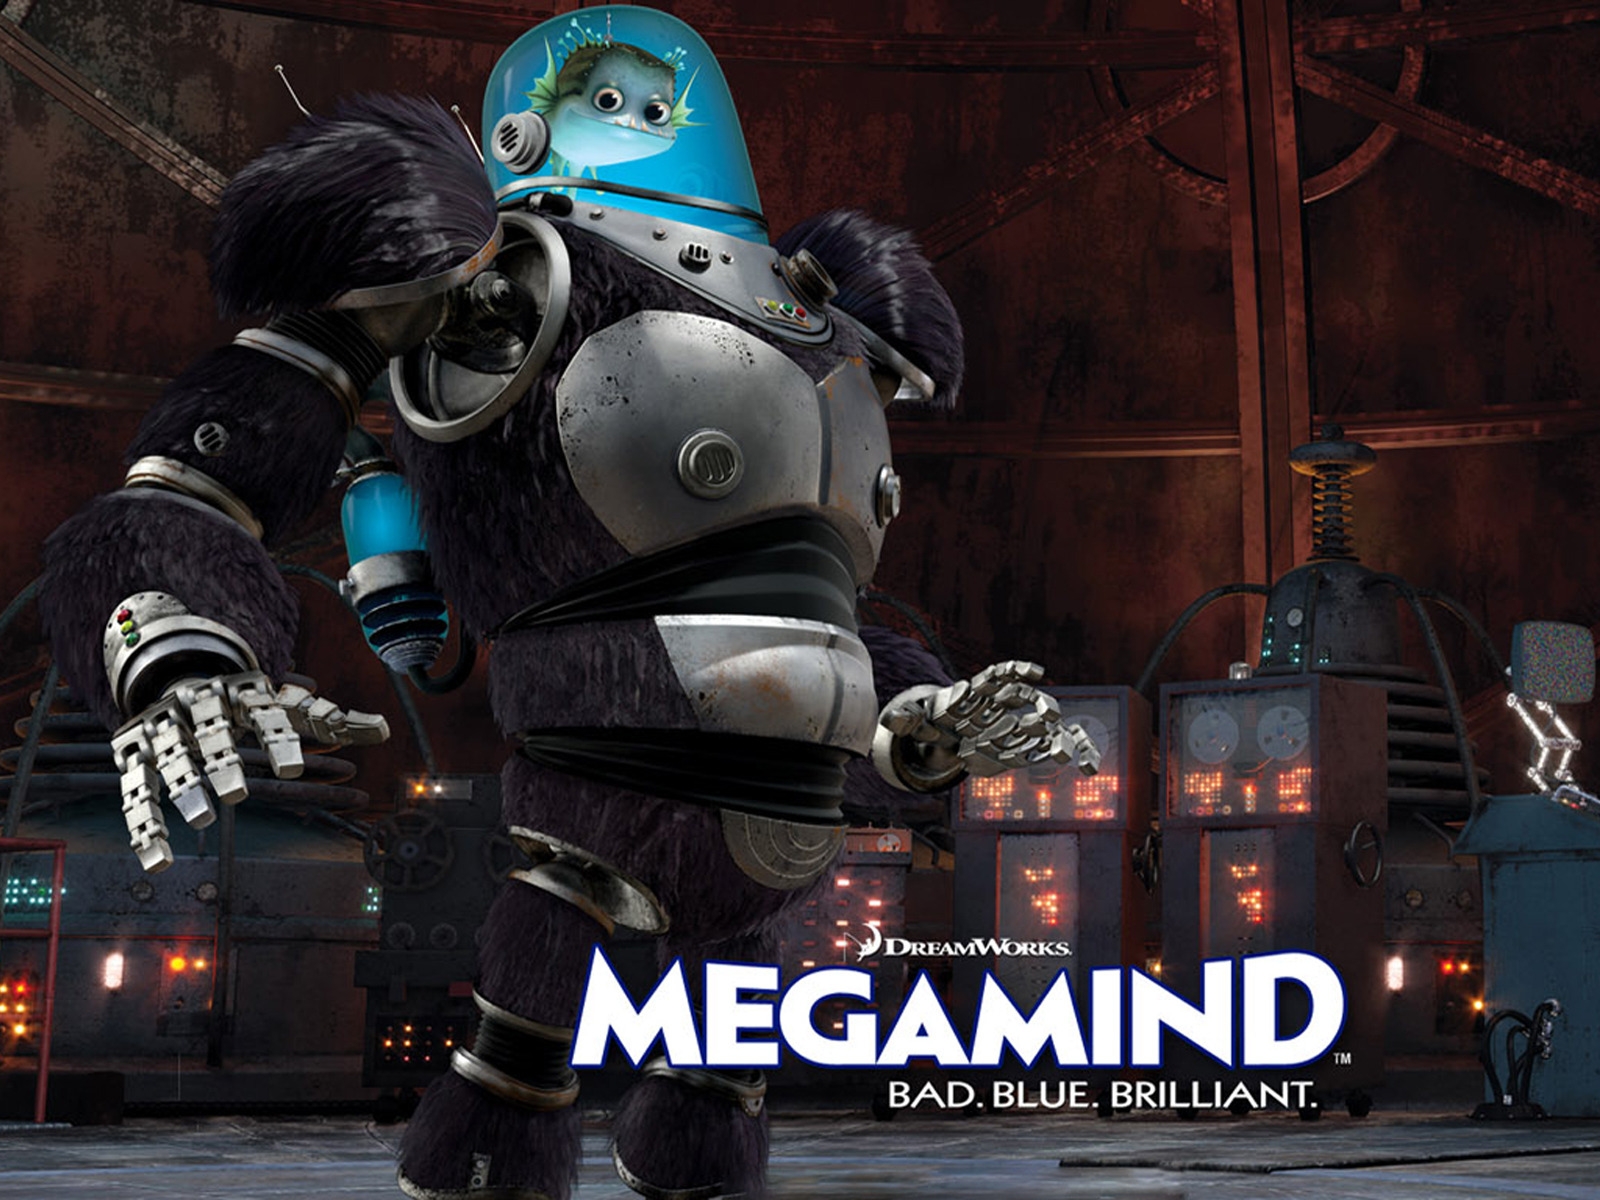 Megamind Minion for 1600 x 1200 resolution